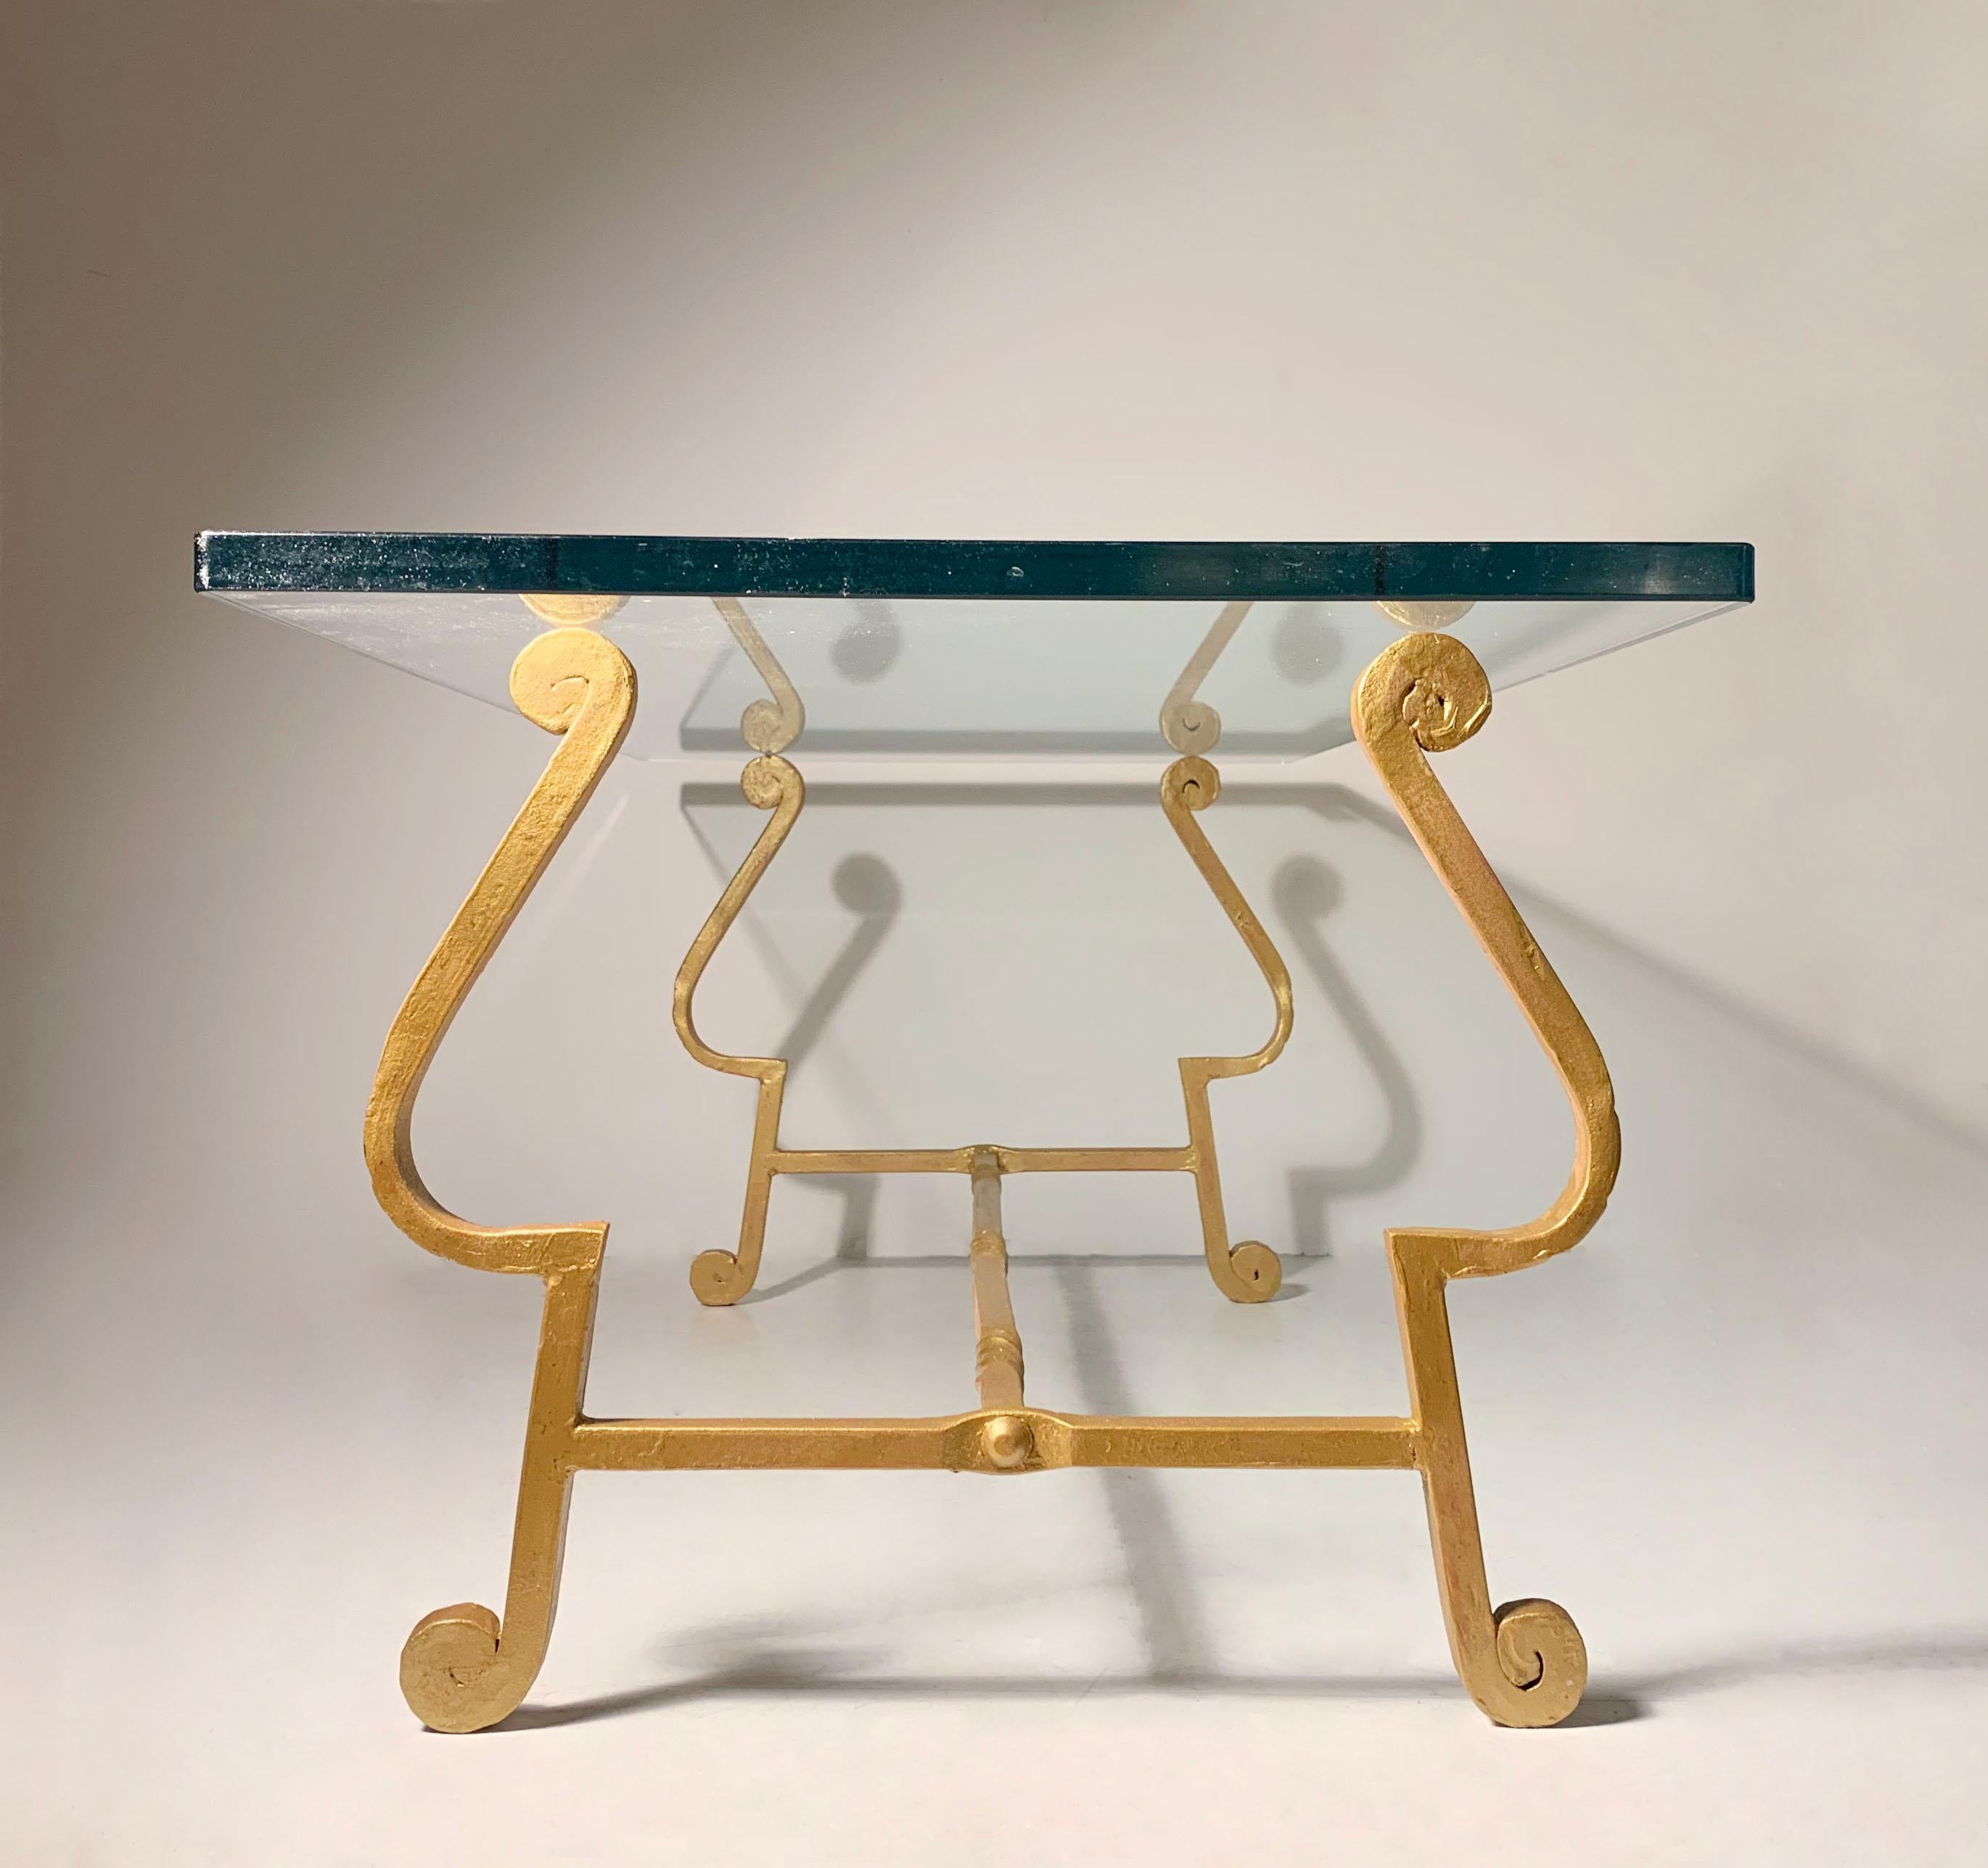 A nice vintage coffee table made in Spain. Dates to the mid-century. Nice coil work with hammered design. In the manner of Maison Ramsay, Gilbert Poillerat

Base was recently repainted with Gold over a red primer.

High end thick glass top is